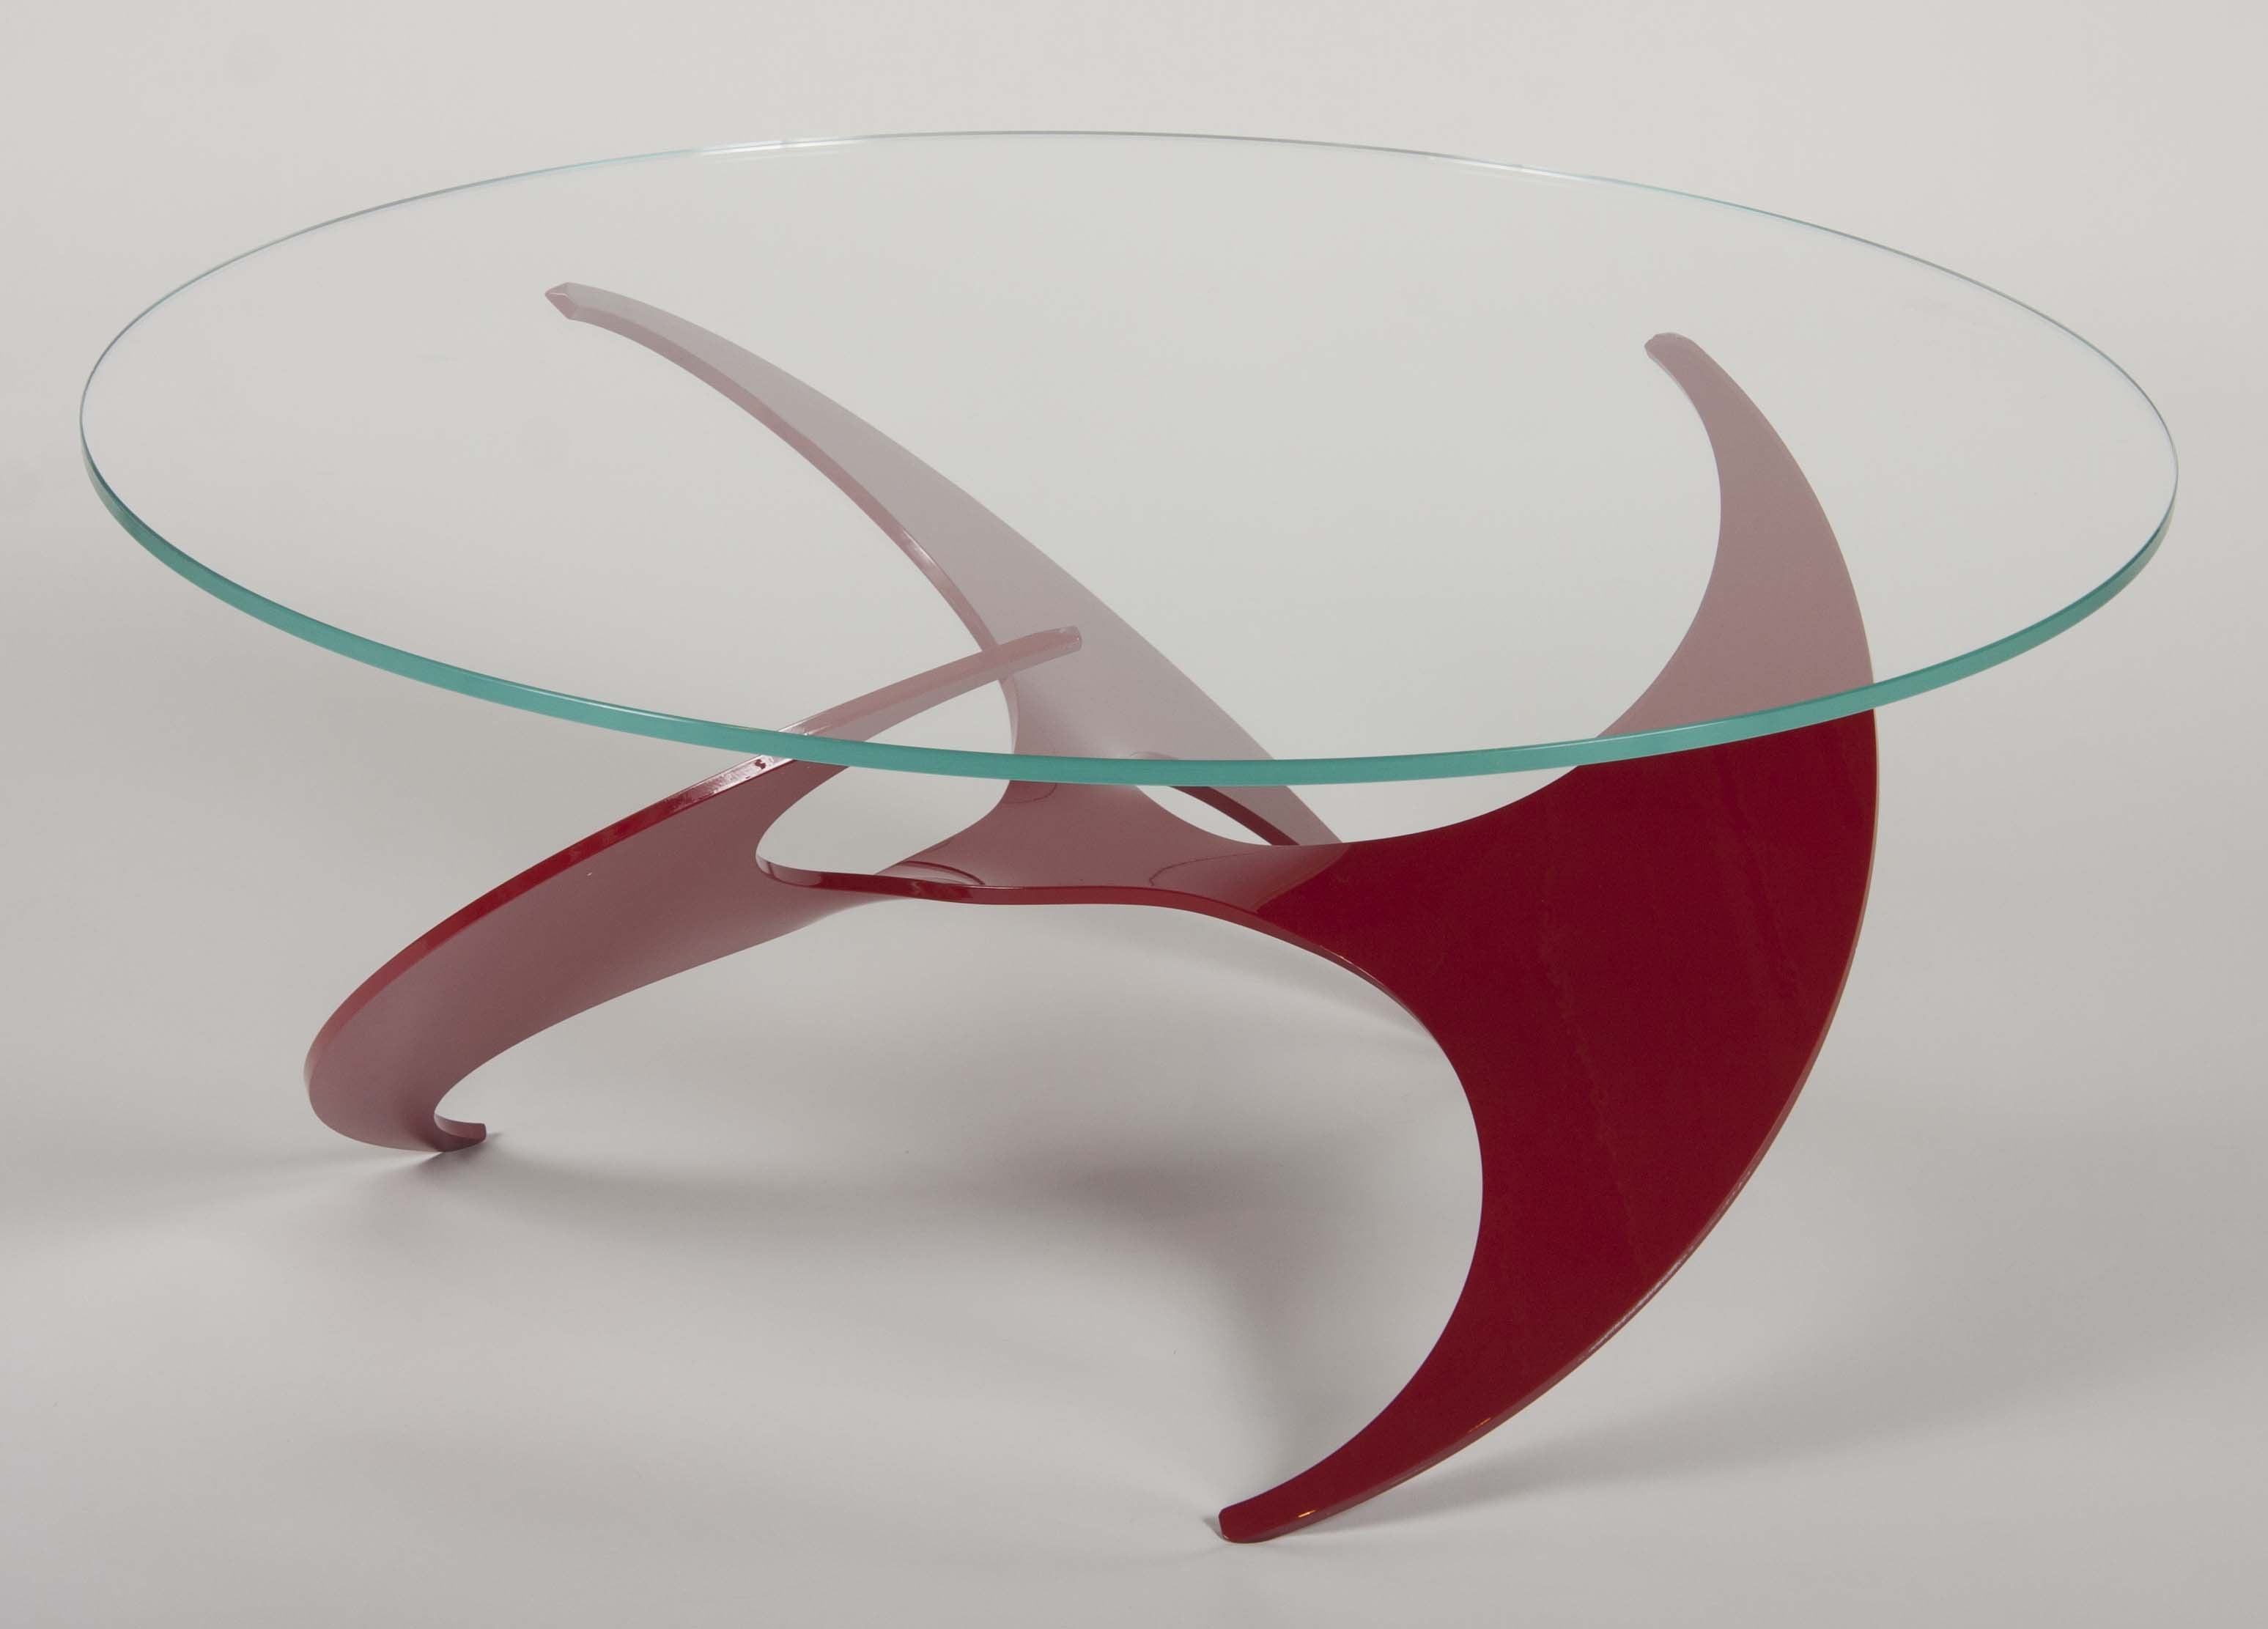 Knut Hesterburg "Propeller" Coffee Table of Cherry Enamel over Anodized Aluminum